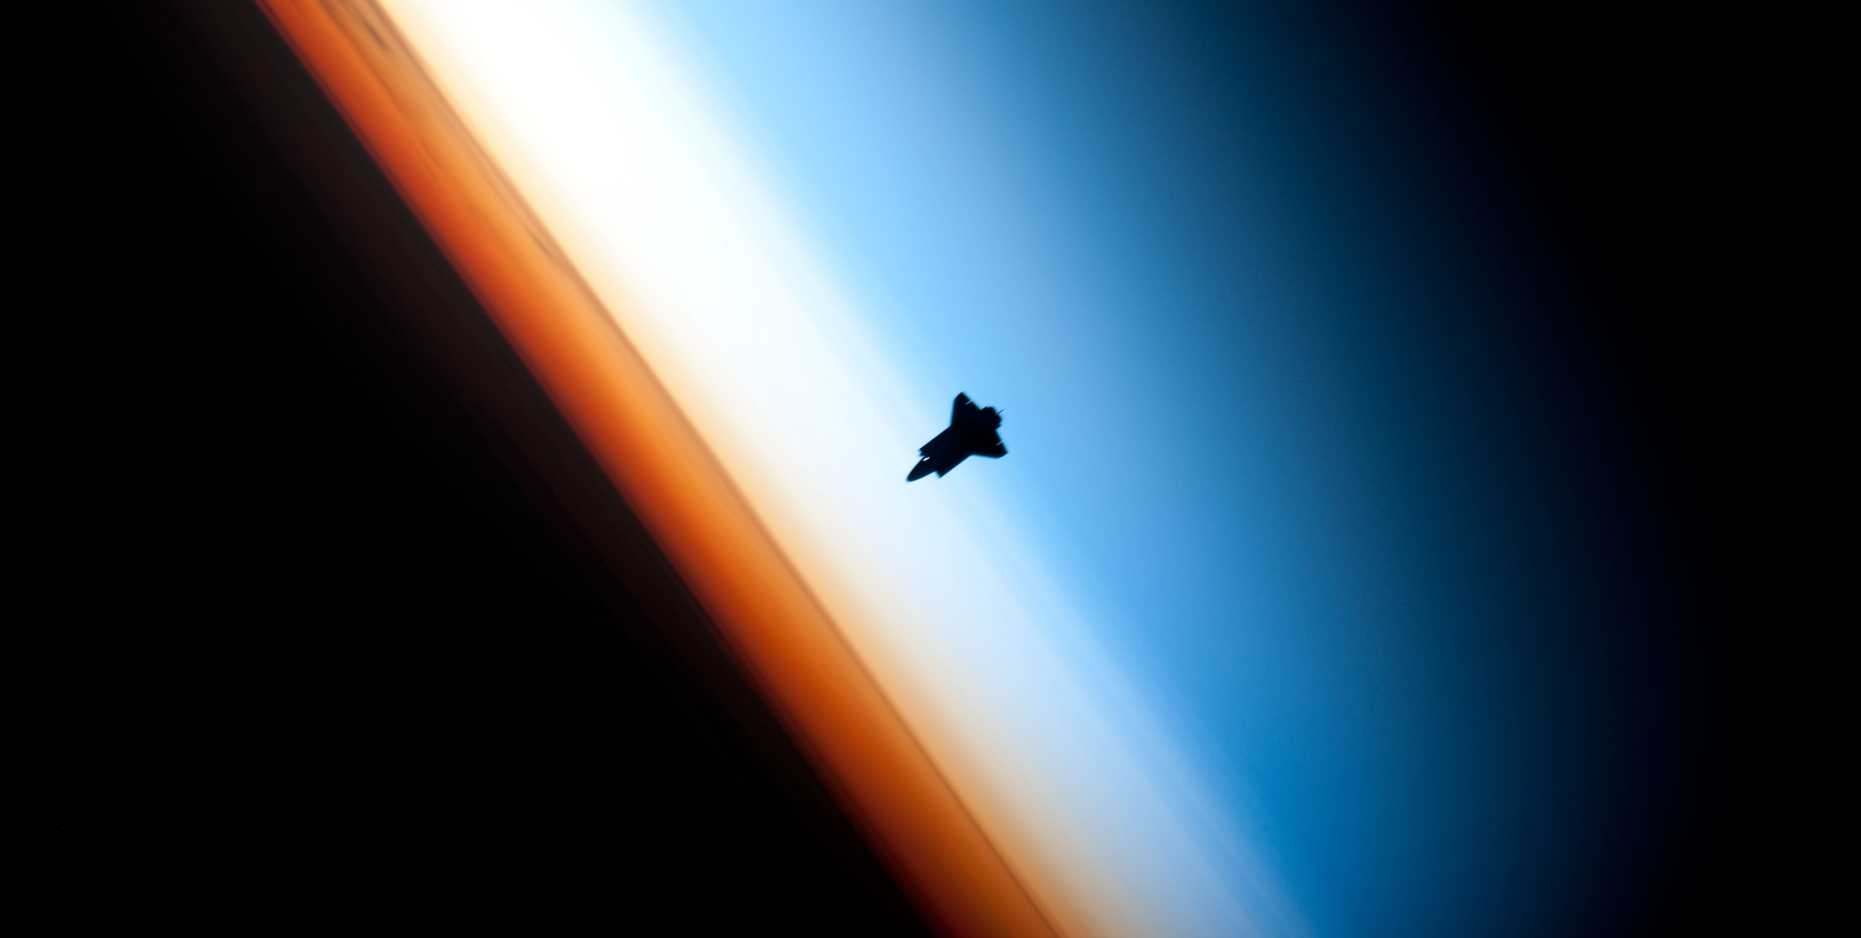 The Space Shuttle Endeavour orbiting at more than 200 miles in altitude and straddling the stratosphere and mesosphere. The orange layer is the troposphere, where all of the weather and clouds which we typically watch and experience are generated and contained. This orange layer gives way to the whitish Stratosphere and then into the Mesosphere. (Source: NASA/ STS-130 Shuttle Mission)